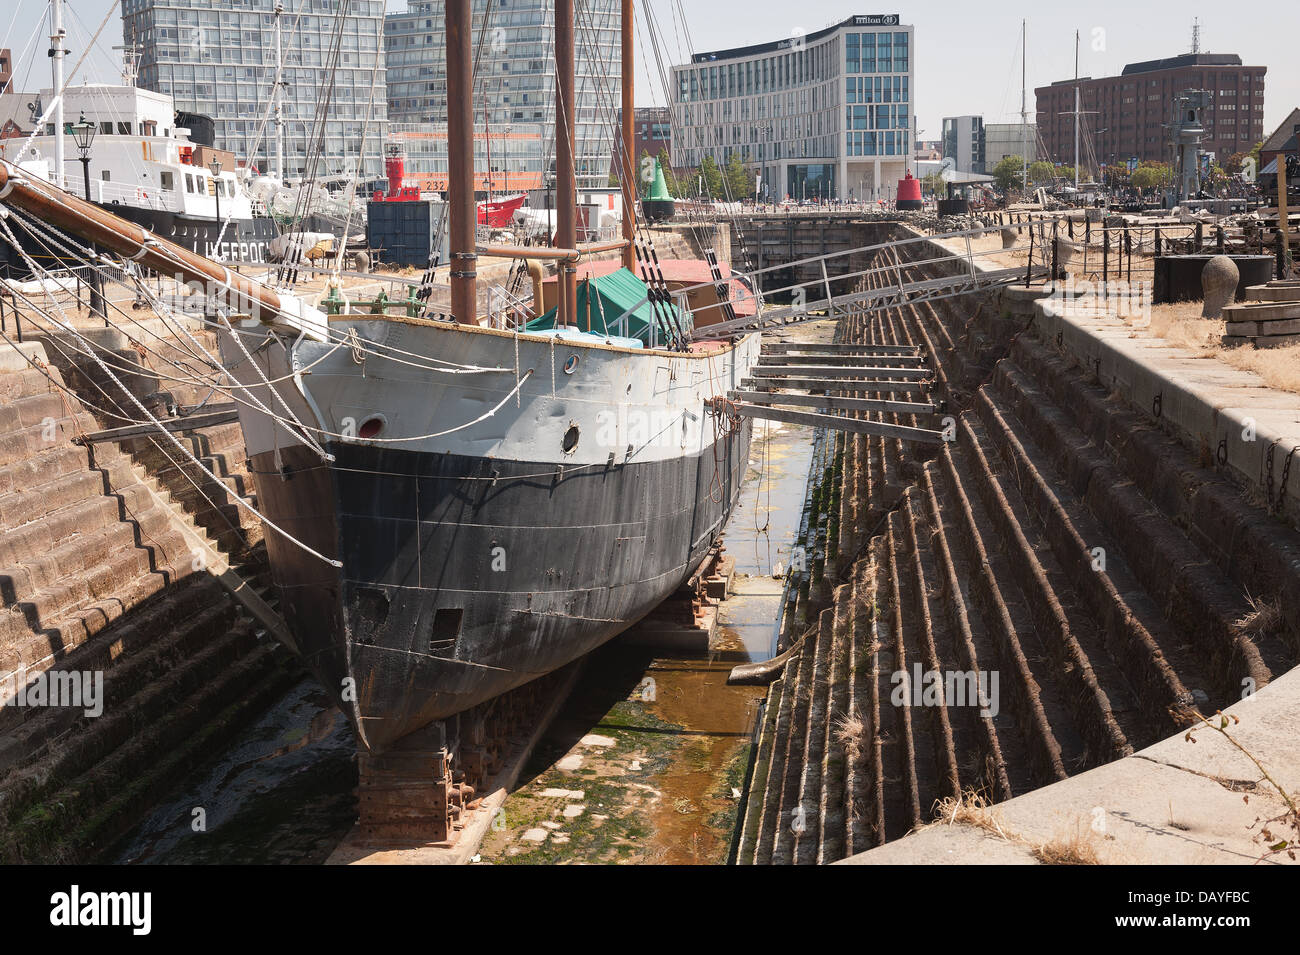 The De Wadden trading sailing ship boat in Canning dry dock against modern rebuild skyline contrasts older traditional past Stock Photo